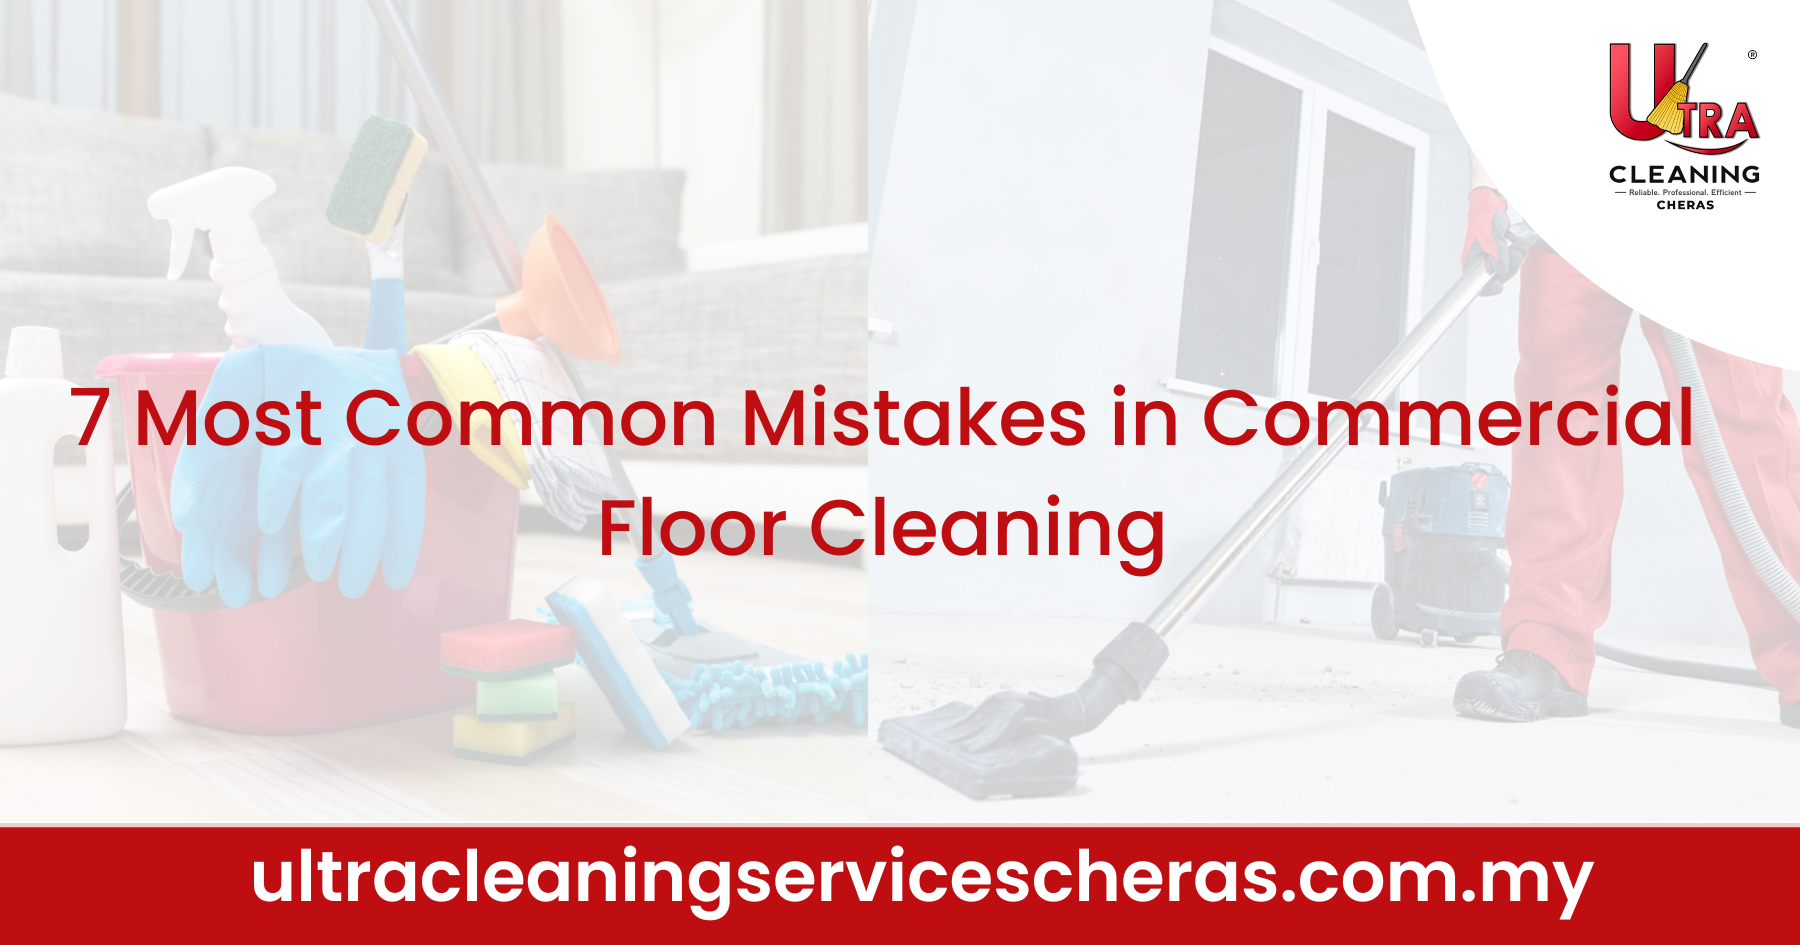 7 Most Common Mistakes in Commercial Floor Cleaning